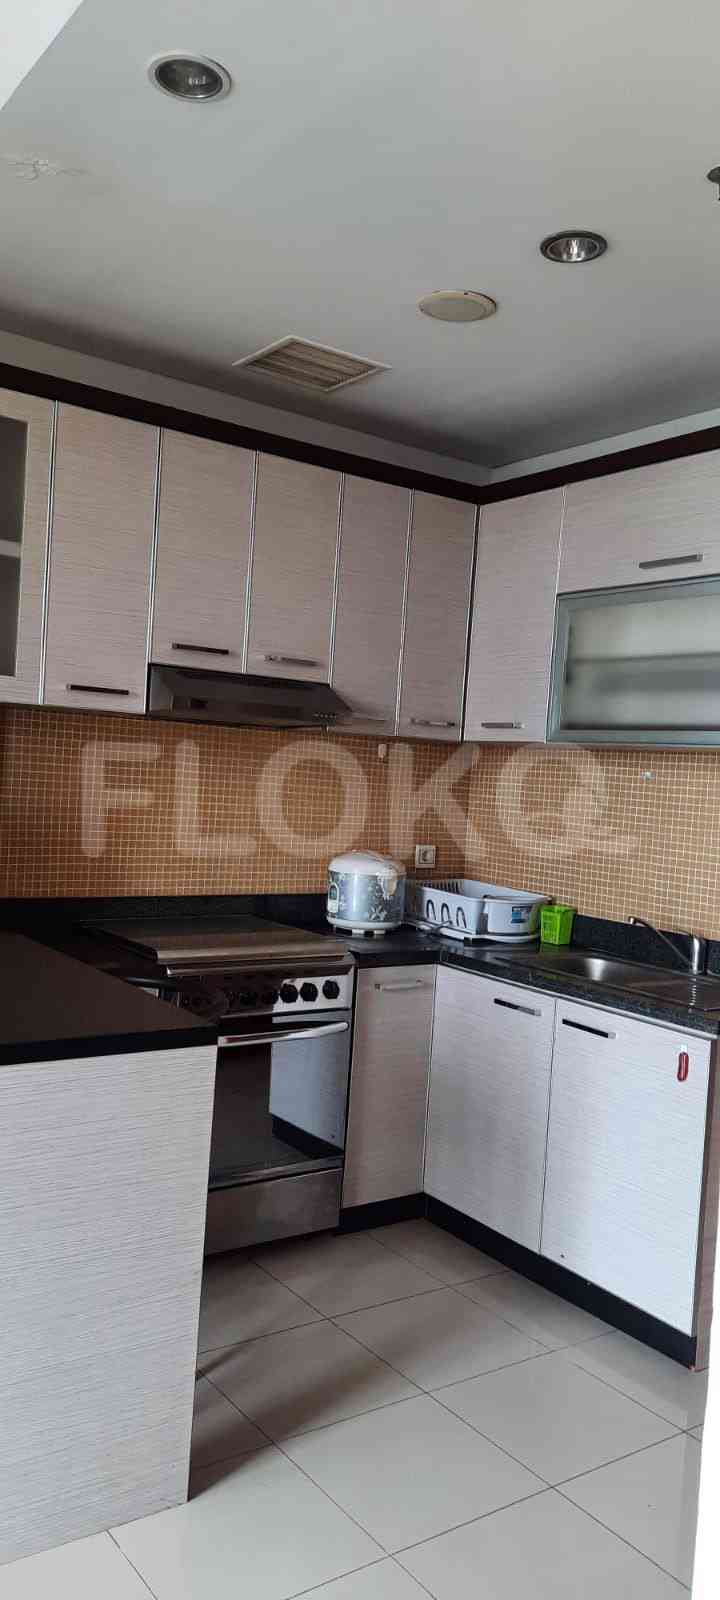 1 Bedroom on 15th Floor for Rent in Kuningan Place Apartment - fkud9c 2